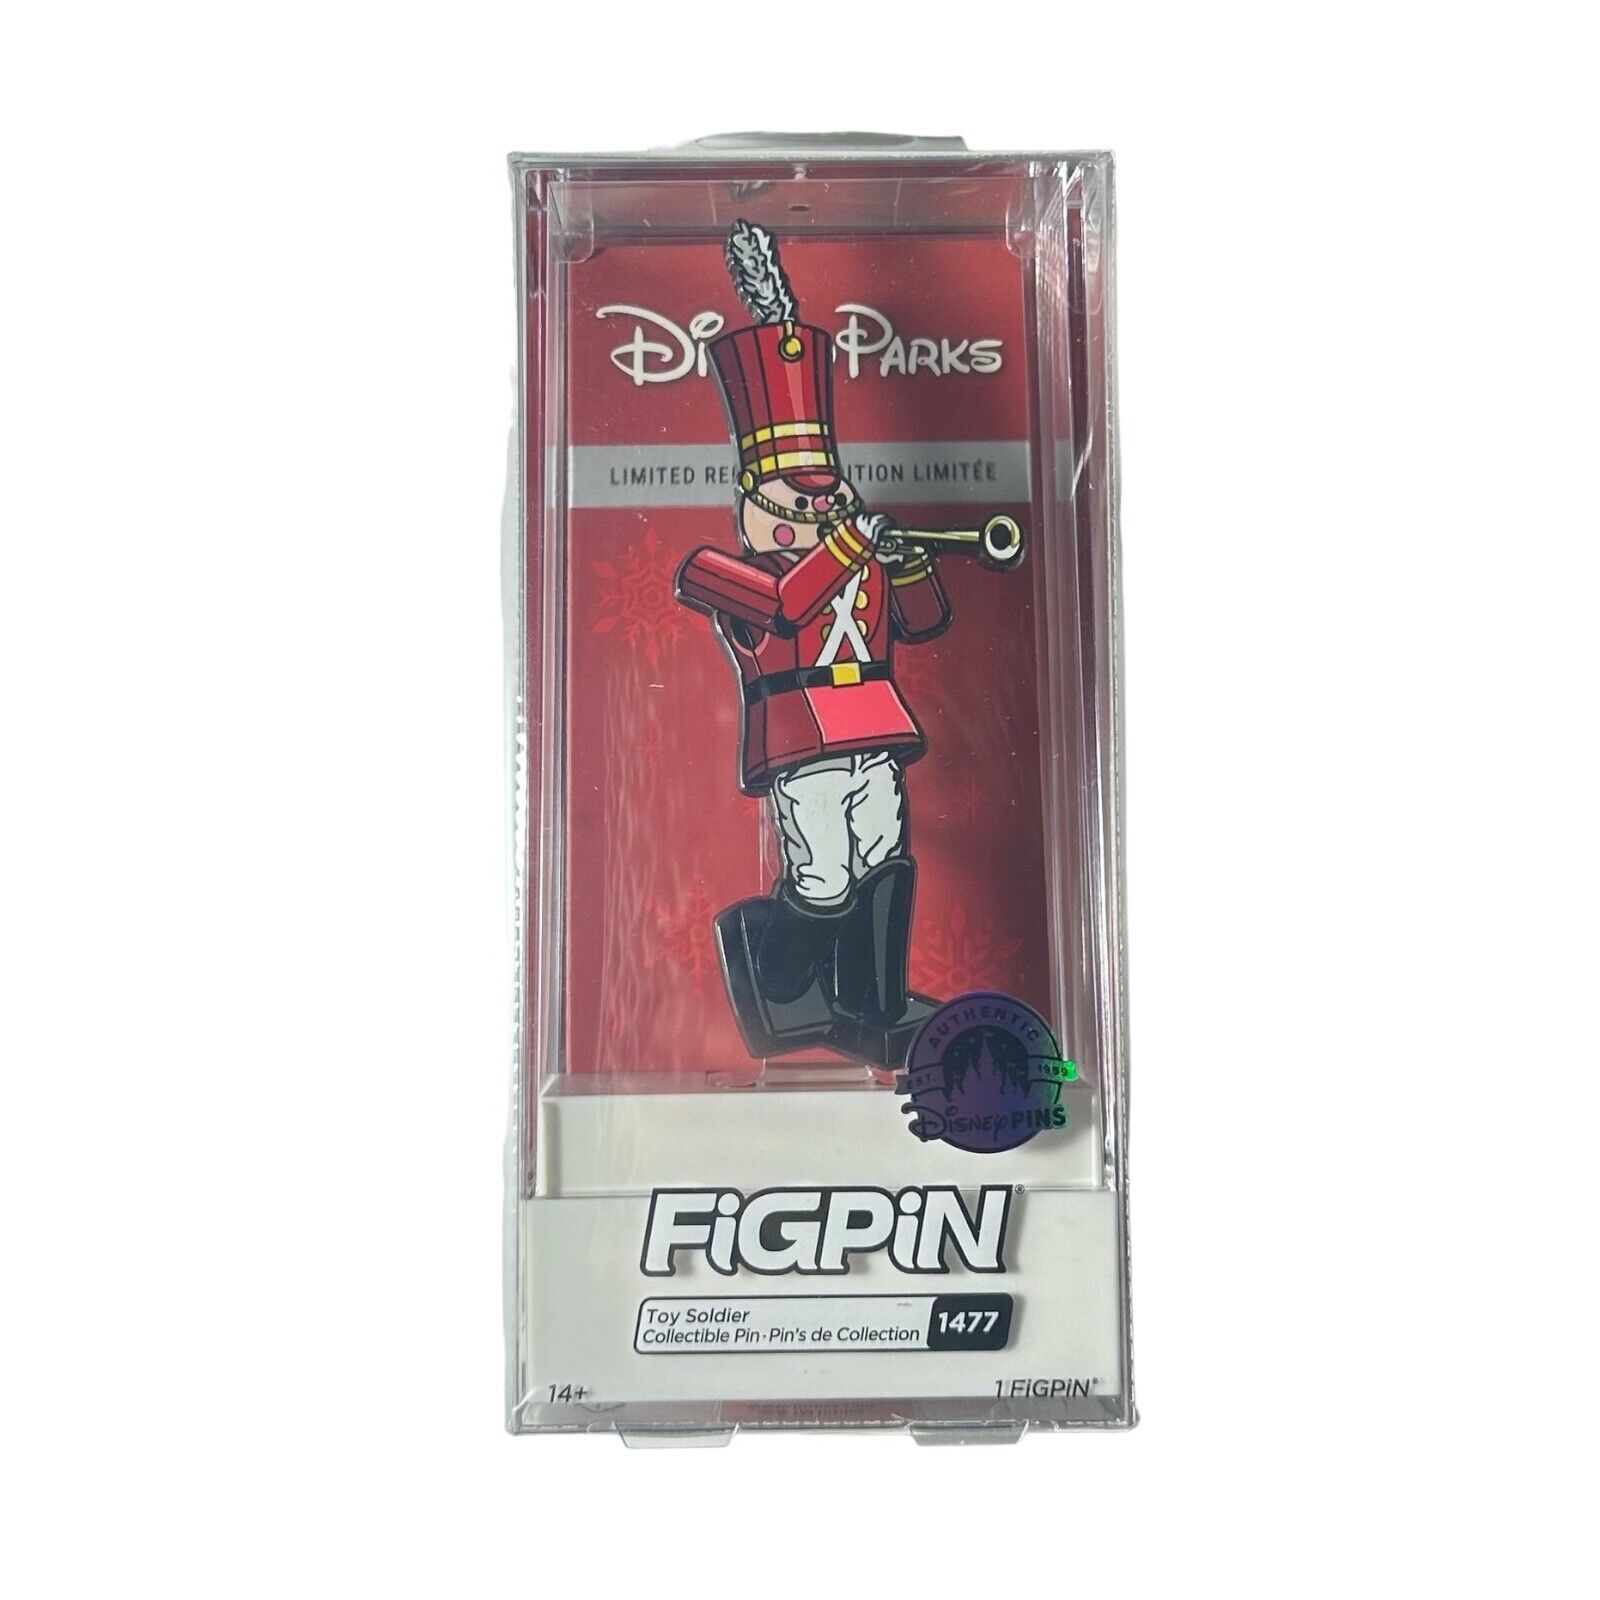 Disney Parks FIGPIN #1477 Christmas Holiday Toy Soldier Pin